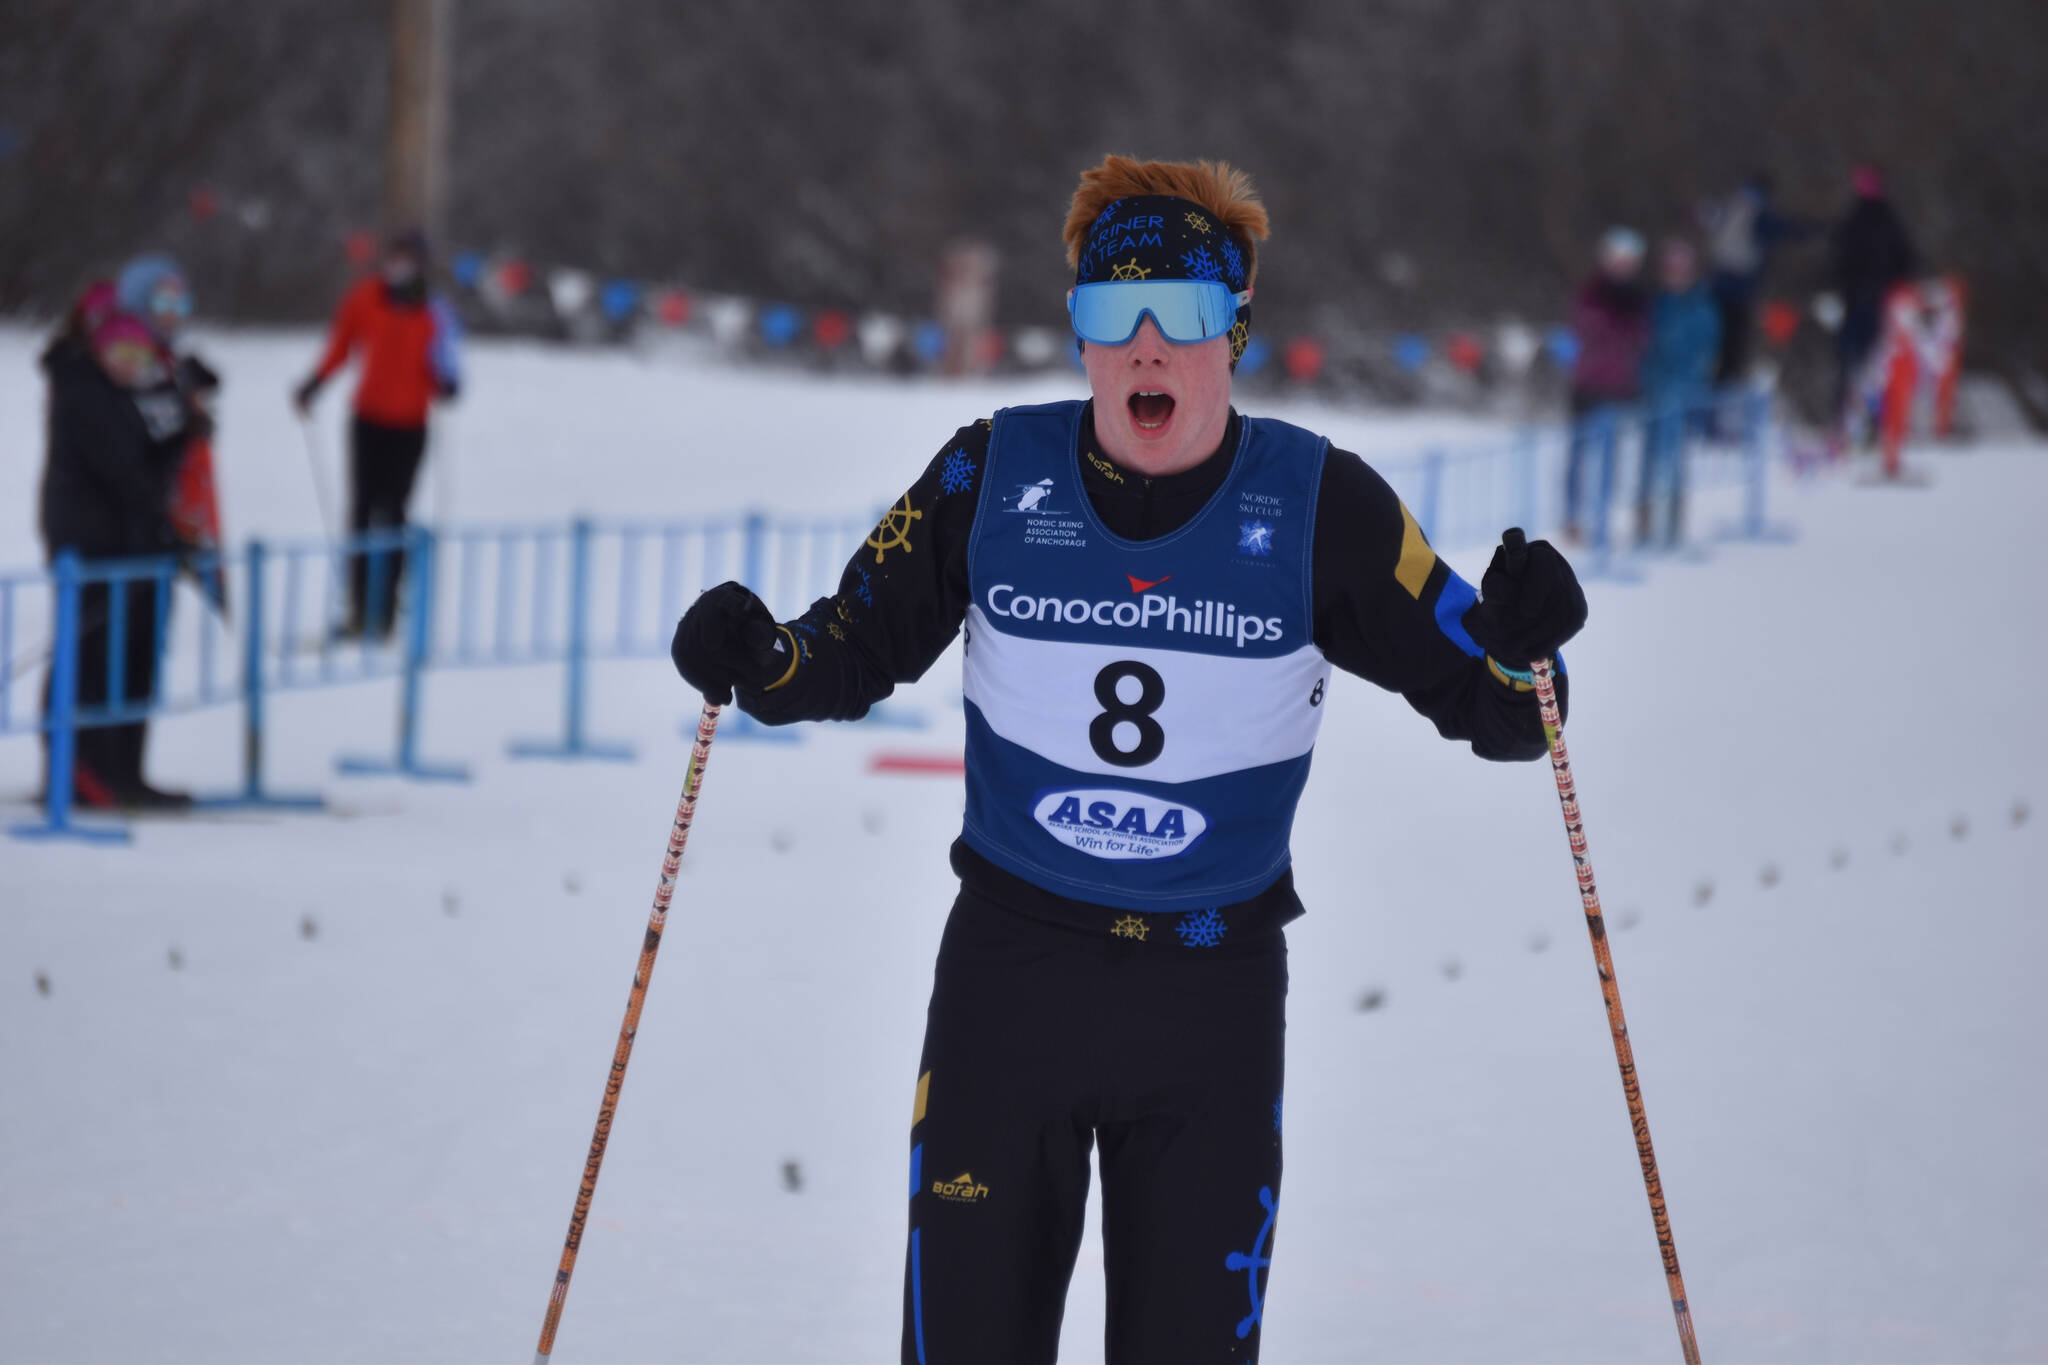 Jody Goodrich gasps for breath as he slows to a stop in the finish chute after the final leg of the boys 4x5-kilometer relay at the ASAA State Nordic Ski Championships at Kincaid Park in Anchorage, Alaska, on Saturday, Feb. 25, 2023. (Jake Dye/Peninsula Clarion)